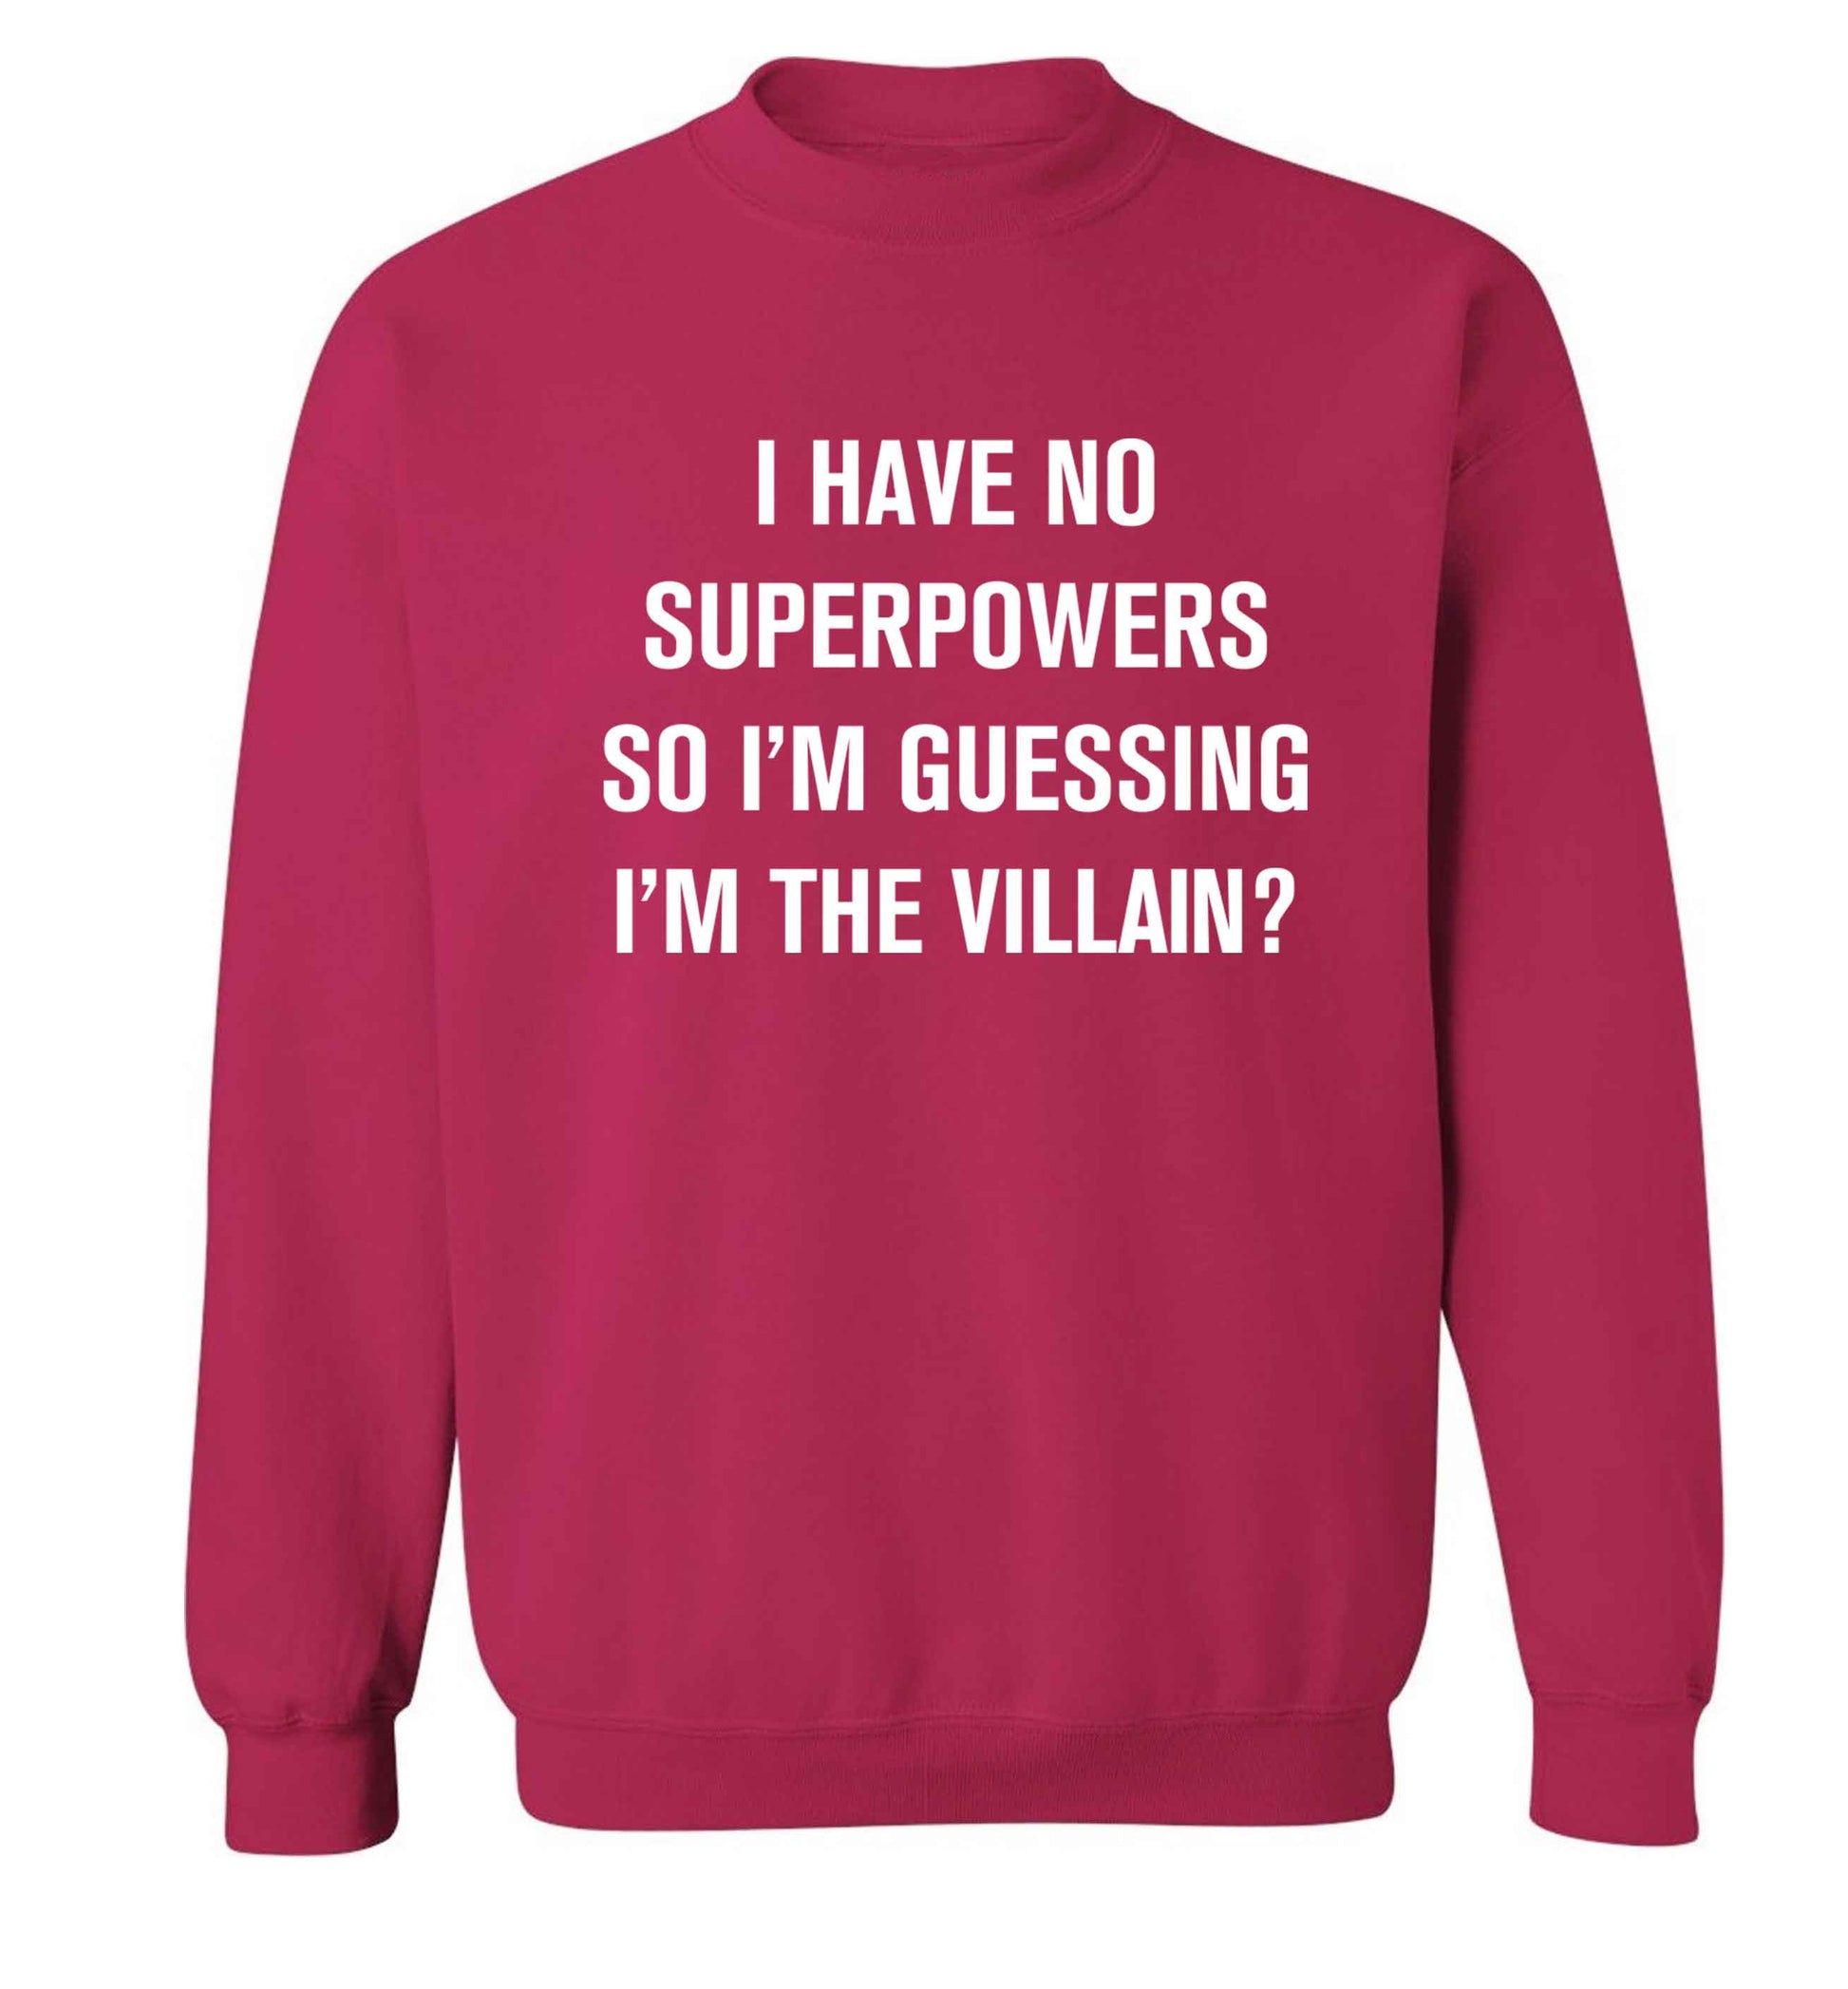 I have no superpowers so I'm guessing I'm the villain? Adult's unisex pink Sweater 2XL